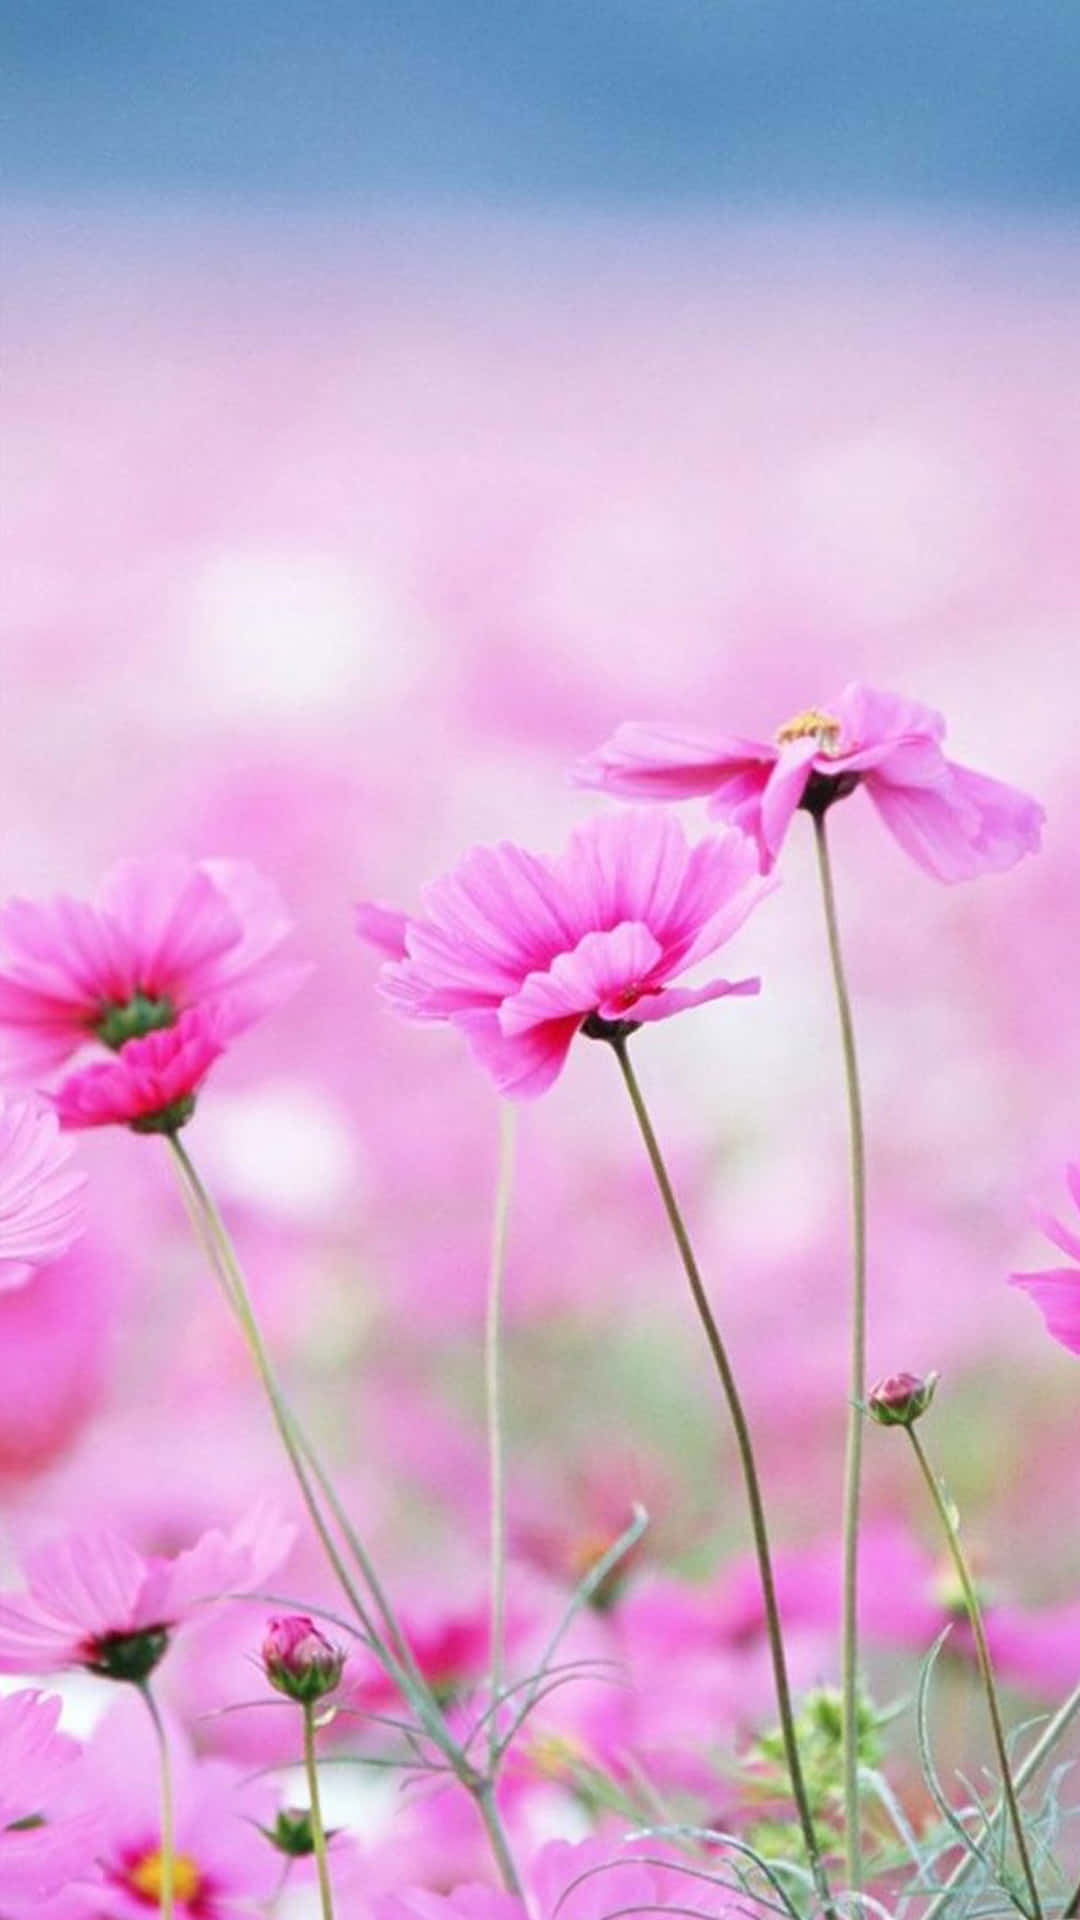 Take a break and admire the beauty of iphone flowers Wallpaper